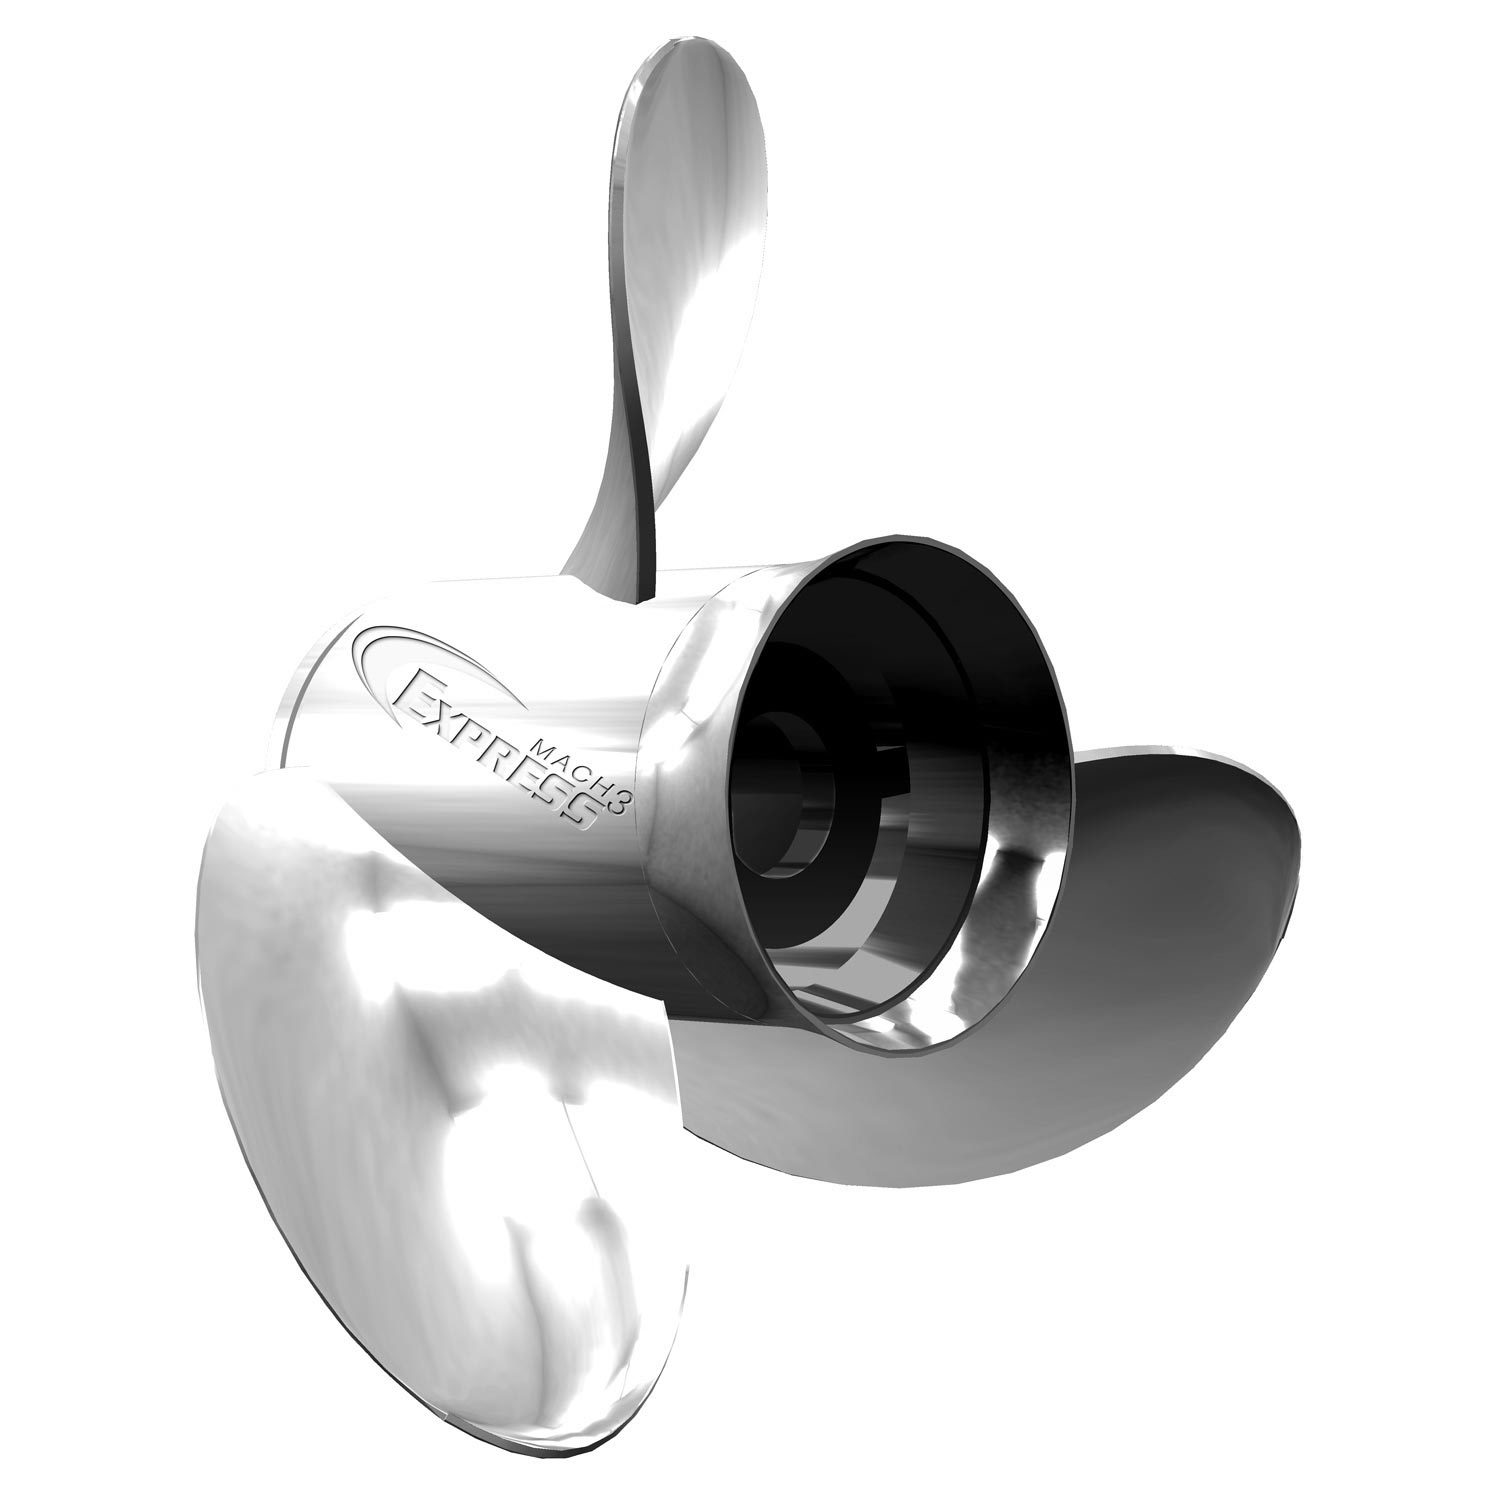 TURNING POINT PROPELLERS 14 1/4 x 19 Express Mach3, 3-Blade, RH,  Stainless Steel Propeller